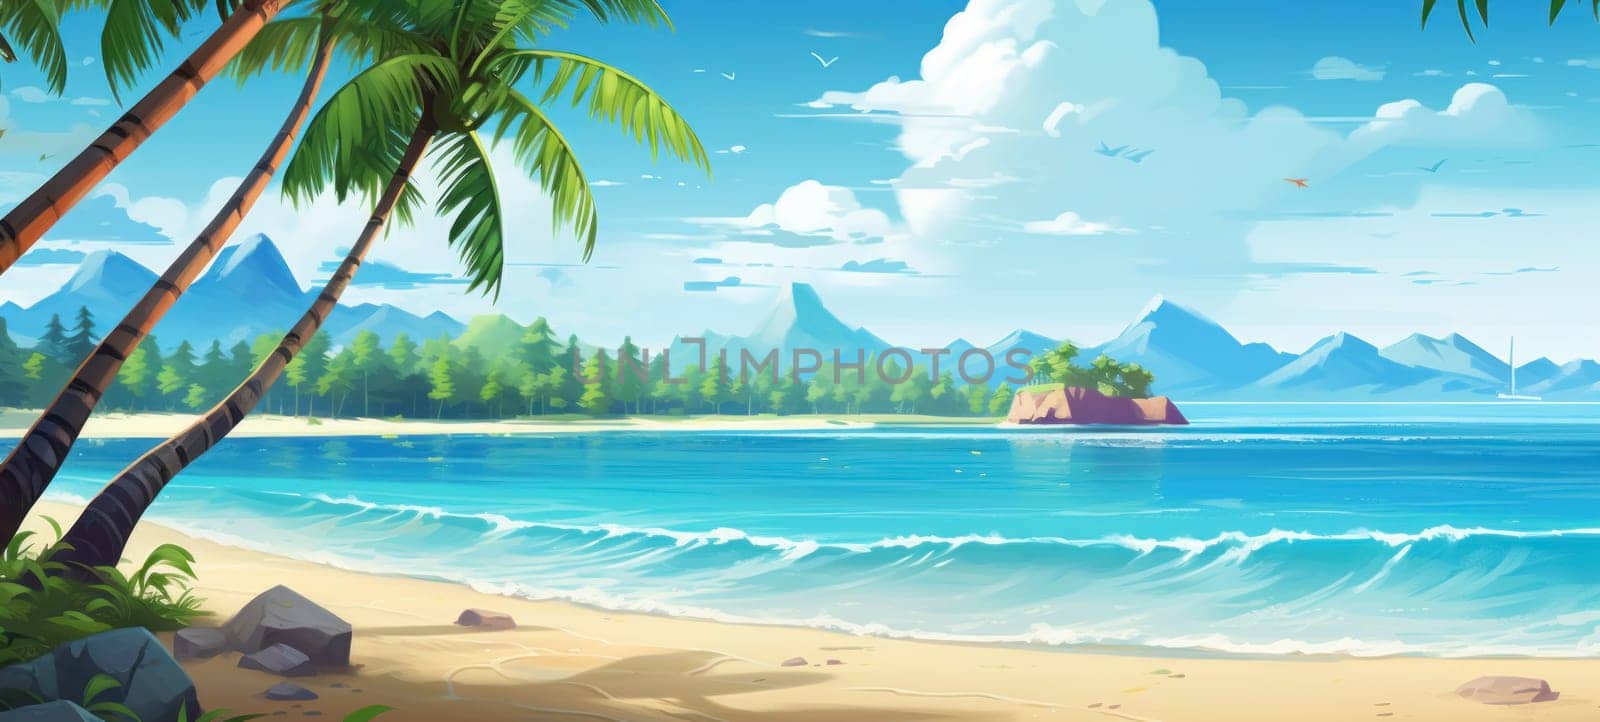 Illustration of a serene tropical beach with palm trees, crystal blue water, and distant mountains, ideal for relaxation.